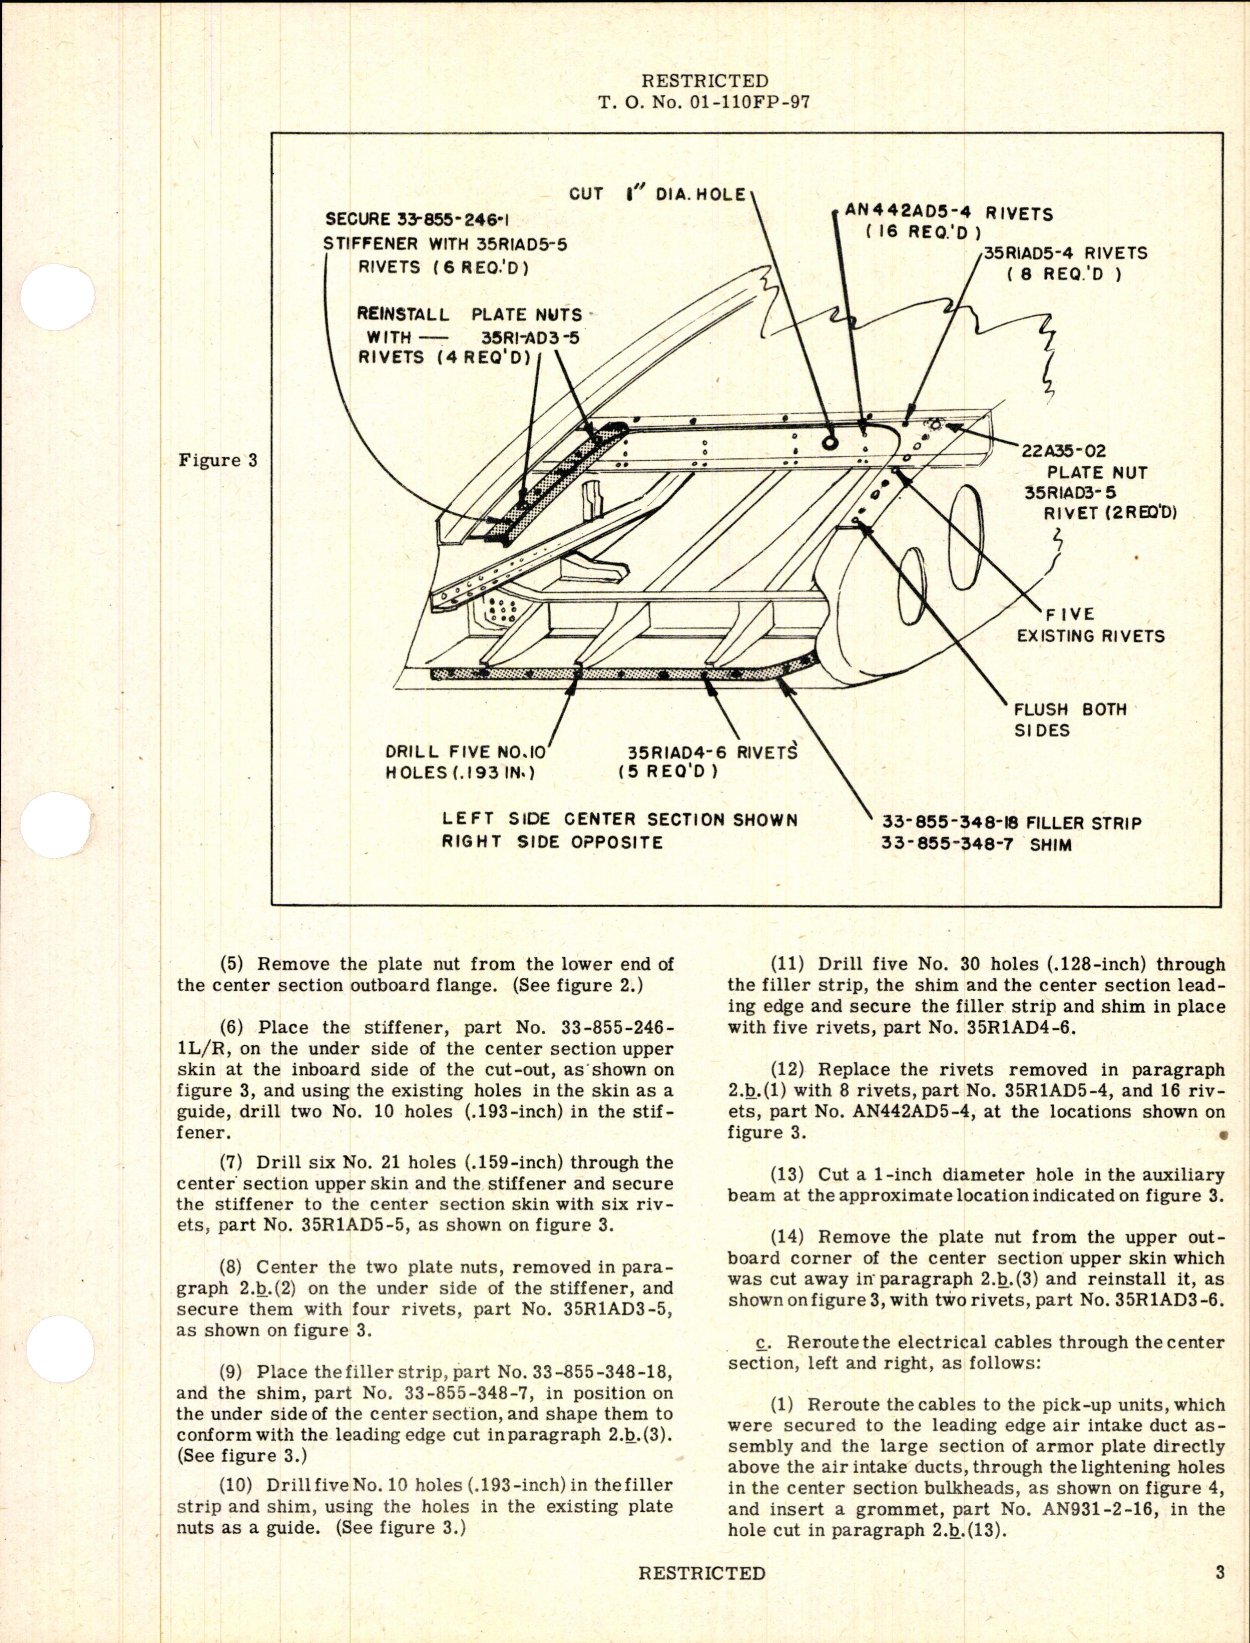 Sample page 3 from AirCorps Library document: Replacement of Oil and Coolant Radiator Air Intake Ducts